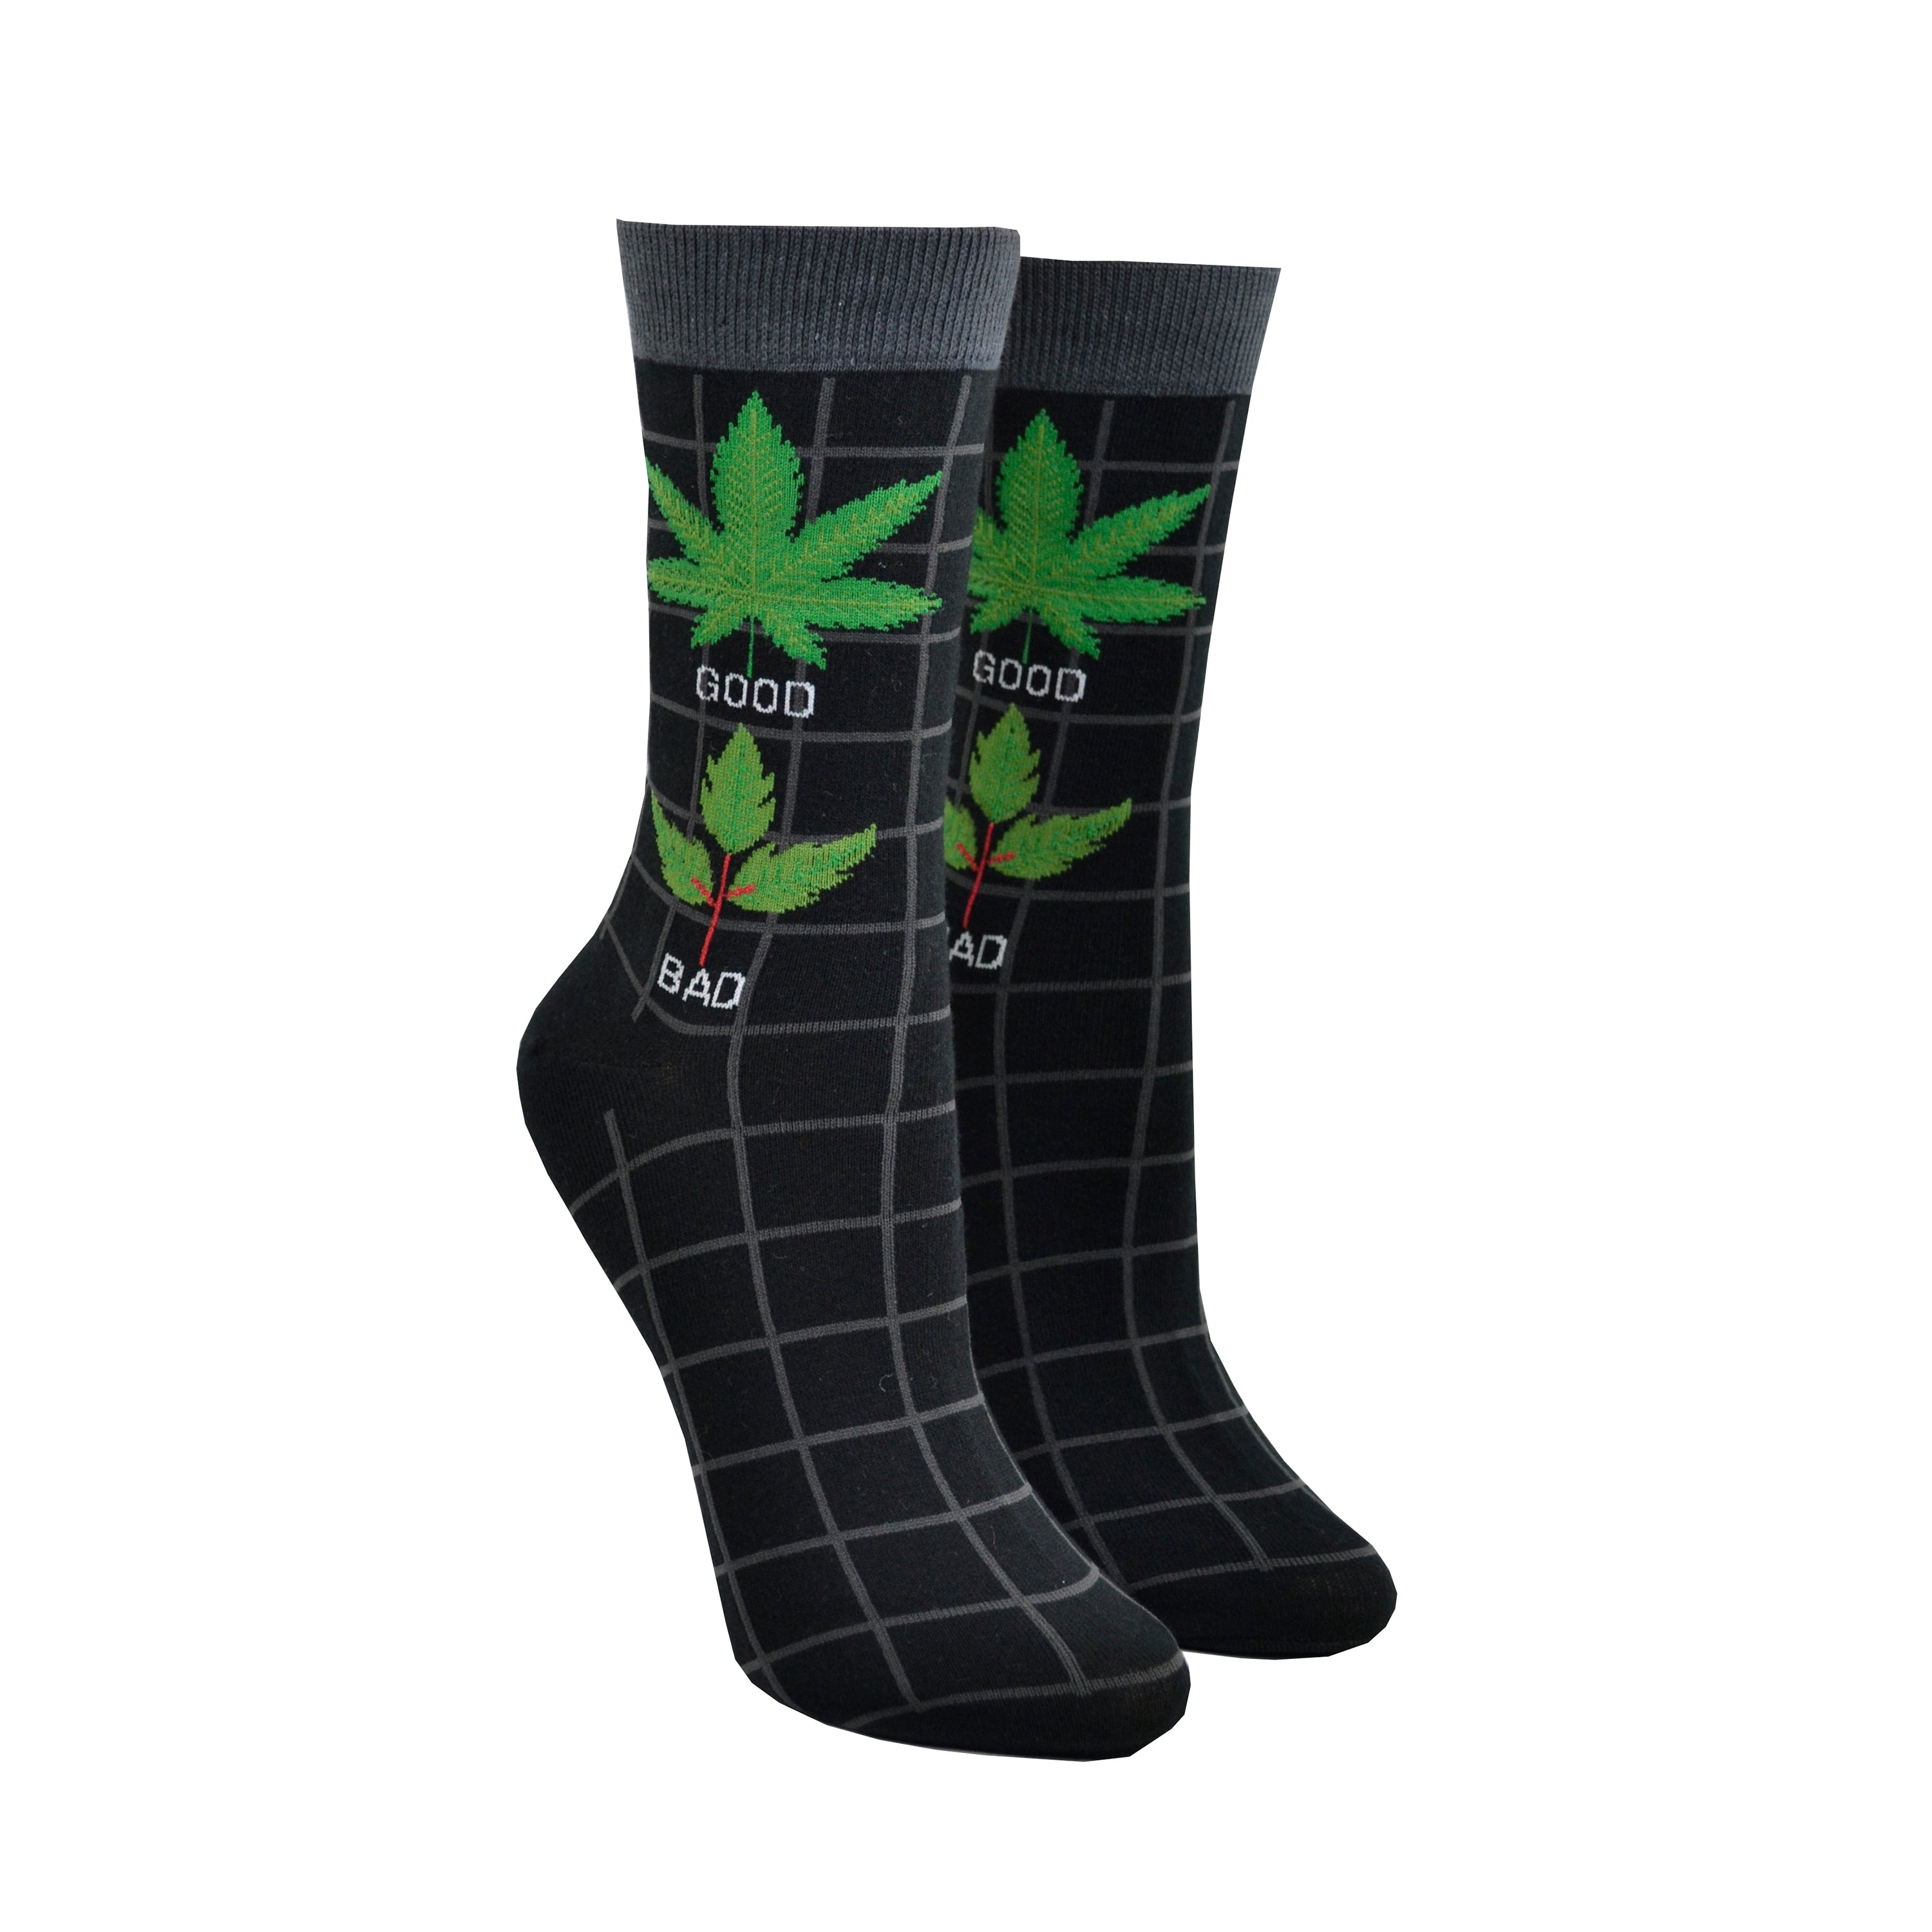 Shown on foot forms, a pair of women's Foot Traffic cotton crew socks in black with a grey cuff and a grey grid pattern. The leg of the sock has a marijuana leaf with the word 